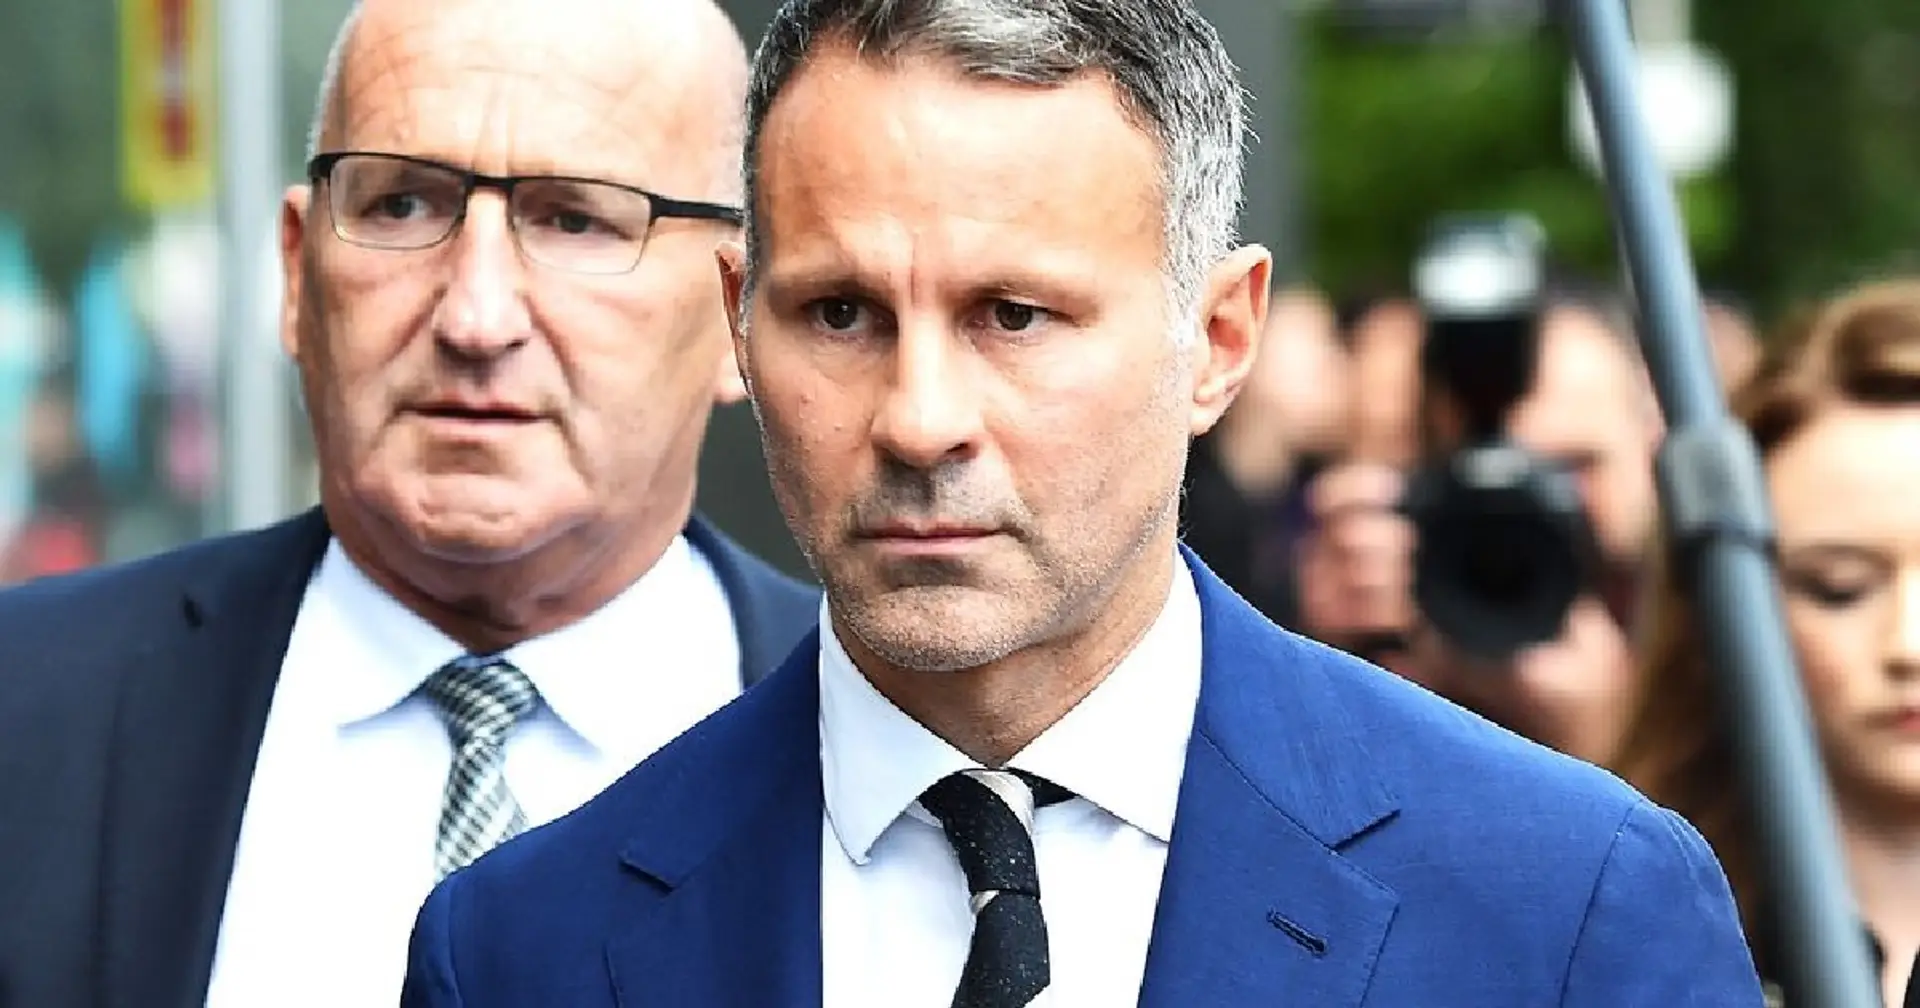 Ryan Giggs reveals next action after being cleared of domestic violence allegations 